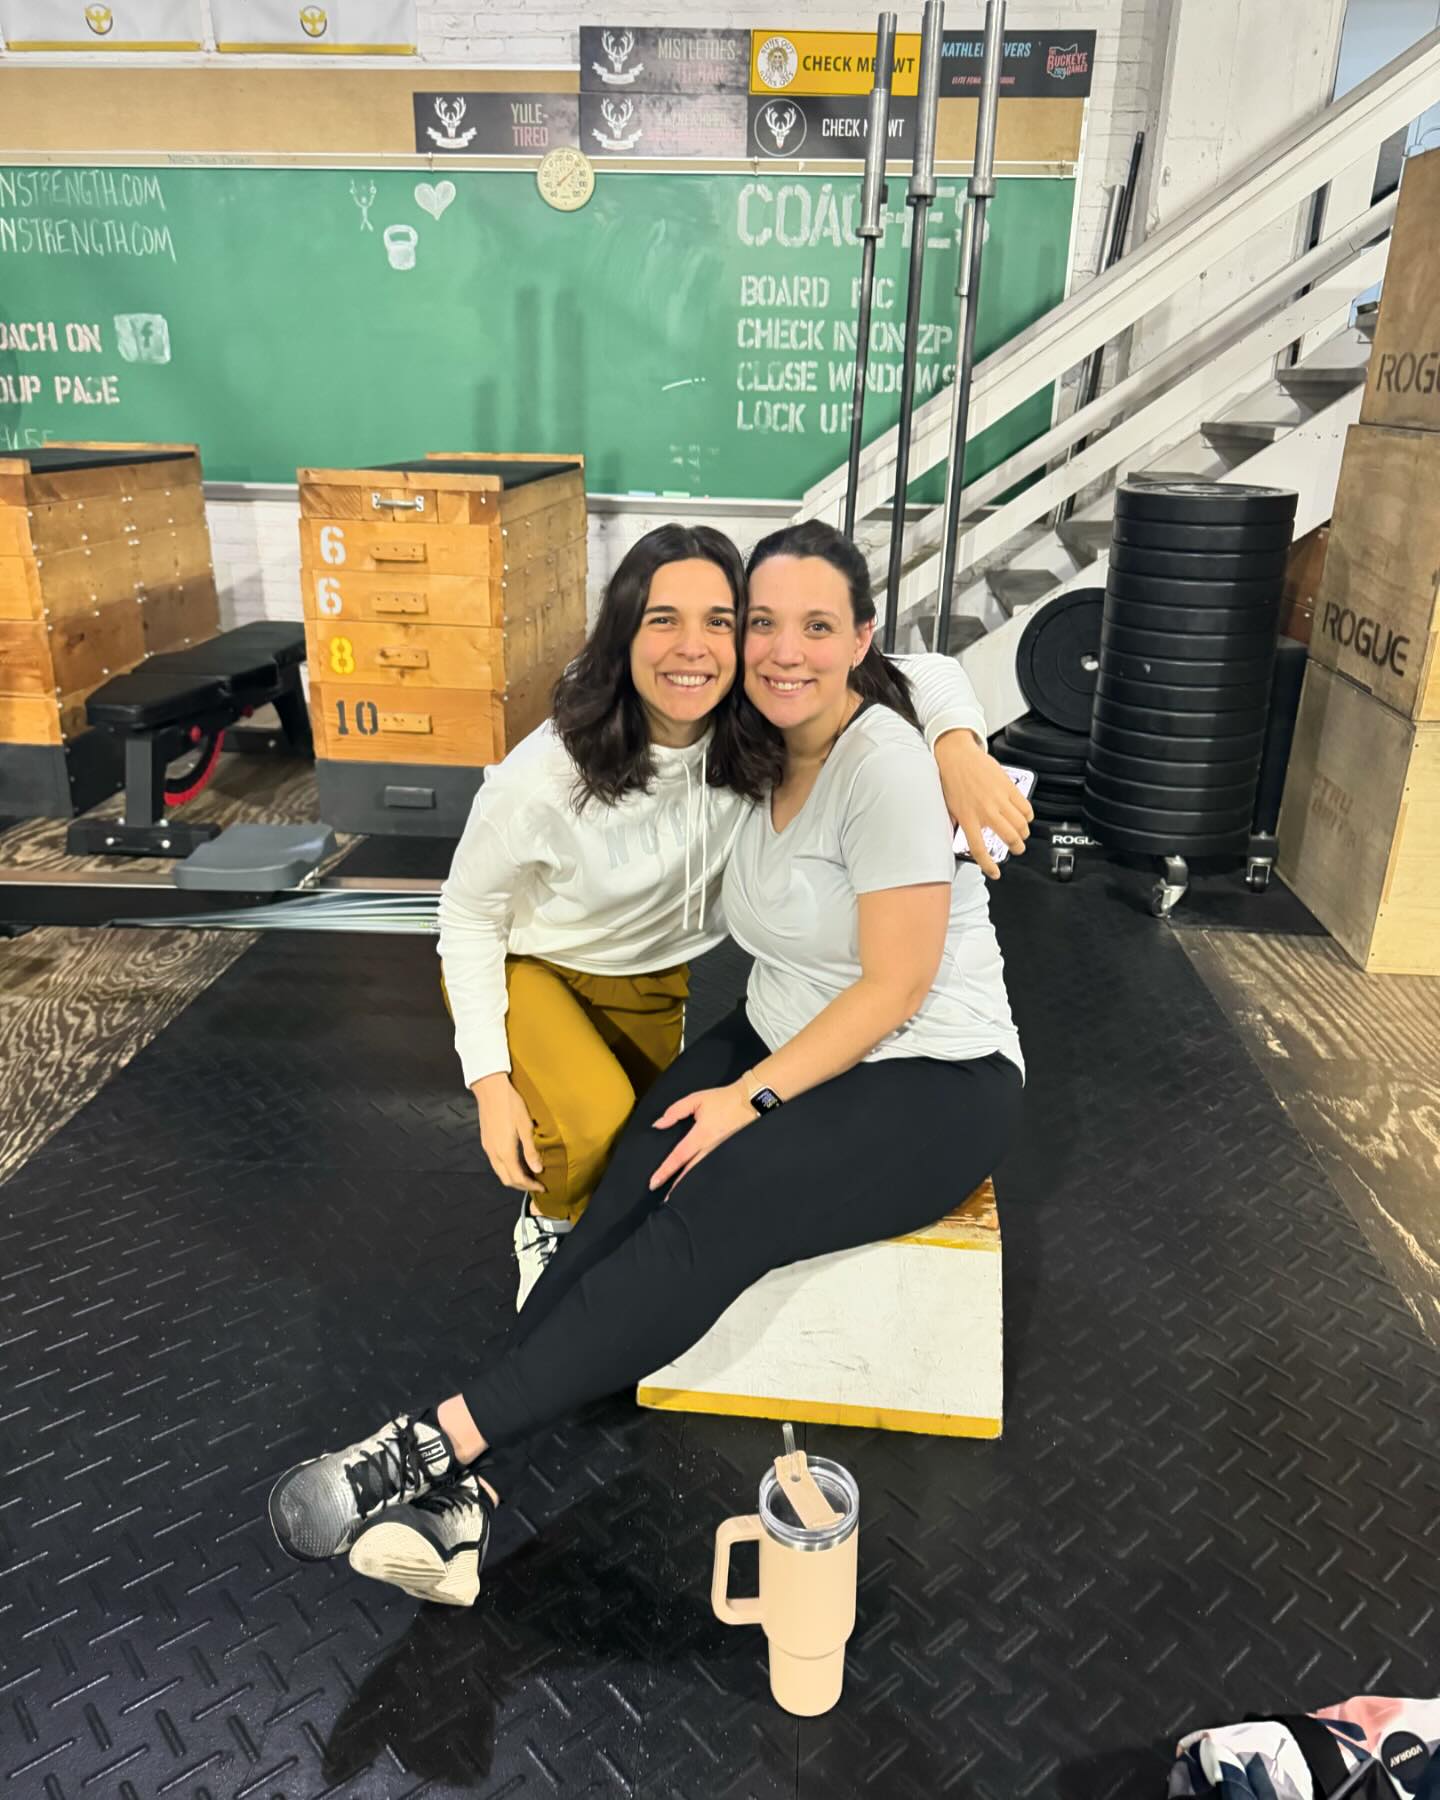 This is Alicia and Maria 💕 They are sisters and they are both athletes at Birdtown Strength. We love how supportive they are towards each other and everyone at the gym. Thanks for being part of the Birdtown Strength family you two! 

Have a friend or family member that has always wanted to try a class? Why not now?! We would love to workout with them too!

 #BirdtownStrength #BirdtownStrong #FunctionalFitness #BeBetter #RedefiningStrength #TeamWorkMakesTheDreamWork #WeAreBirdtown #Lakewood #Ohio #LakewoodOhio